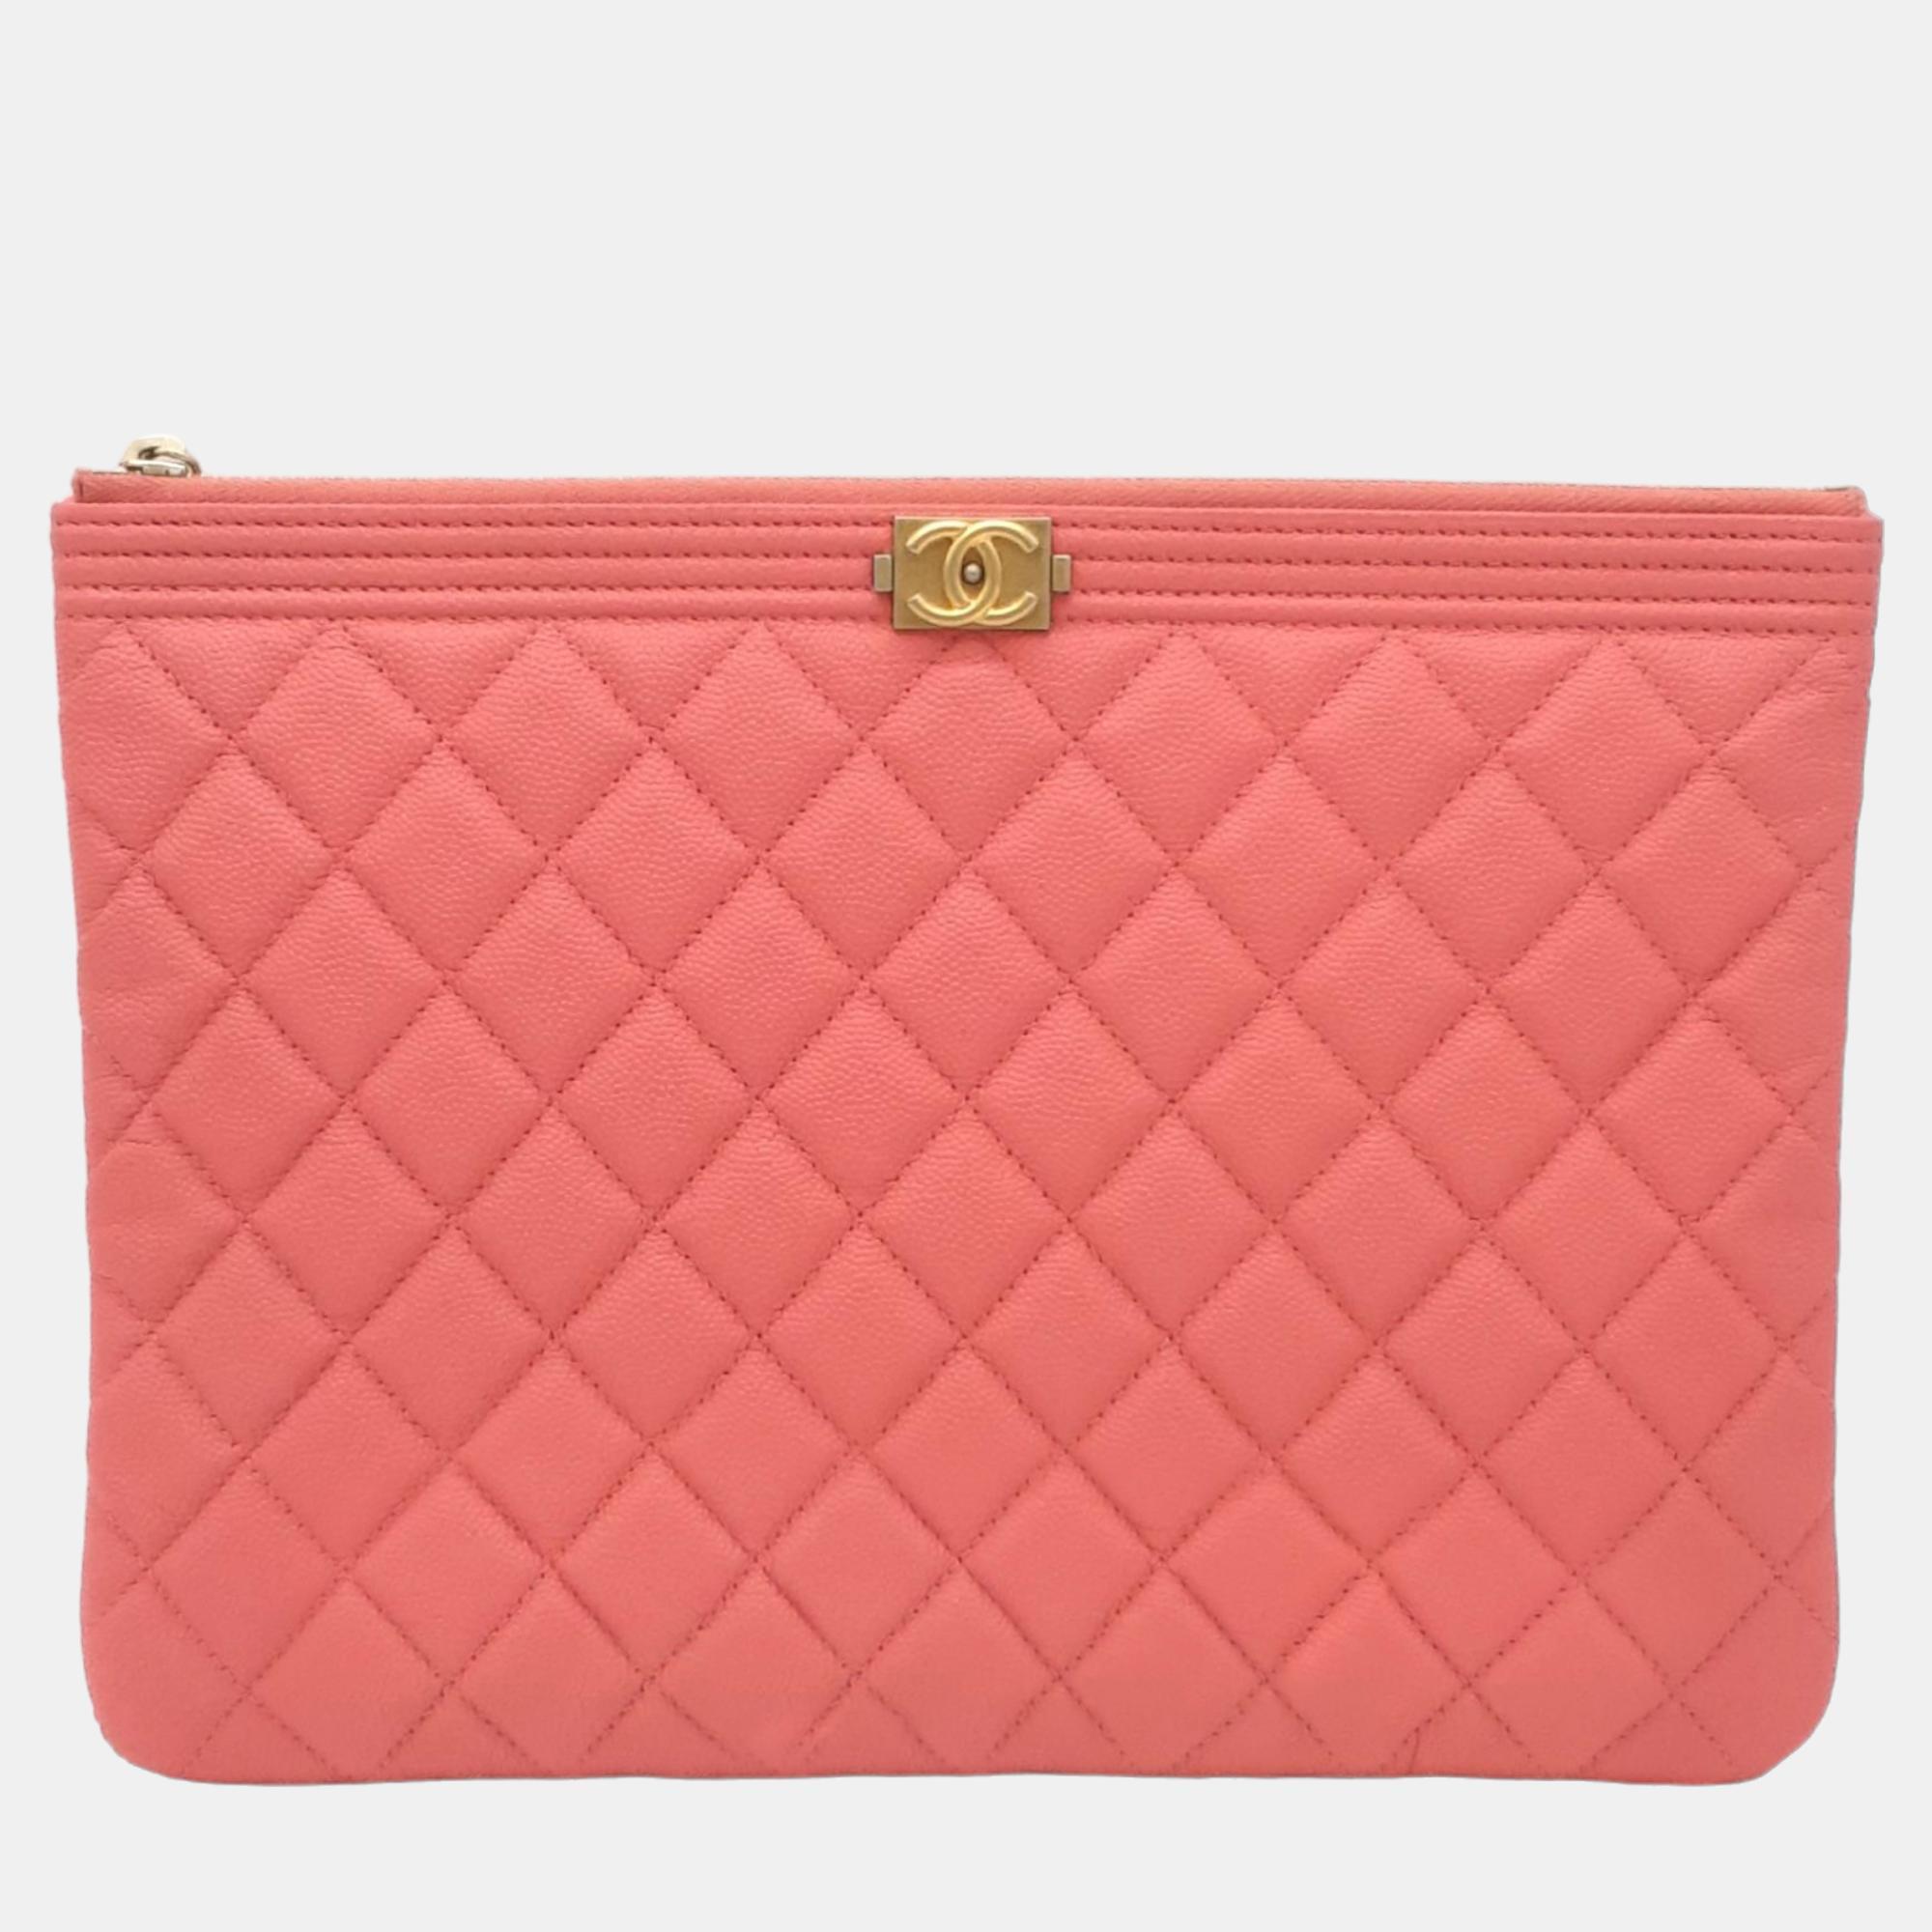 Pre-owned Chanel Pink Caviar Leather O Case Quilted Medium Boy Clutch Bag